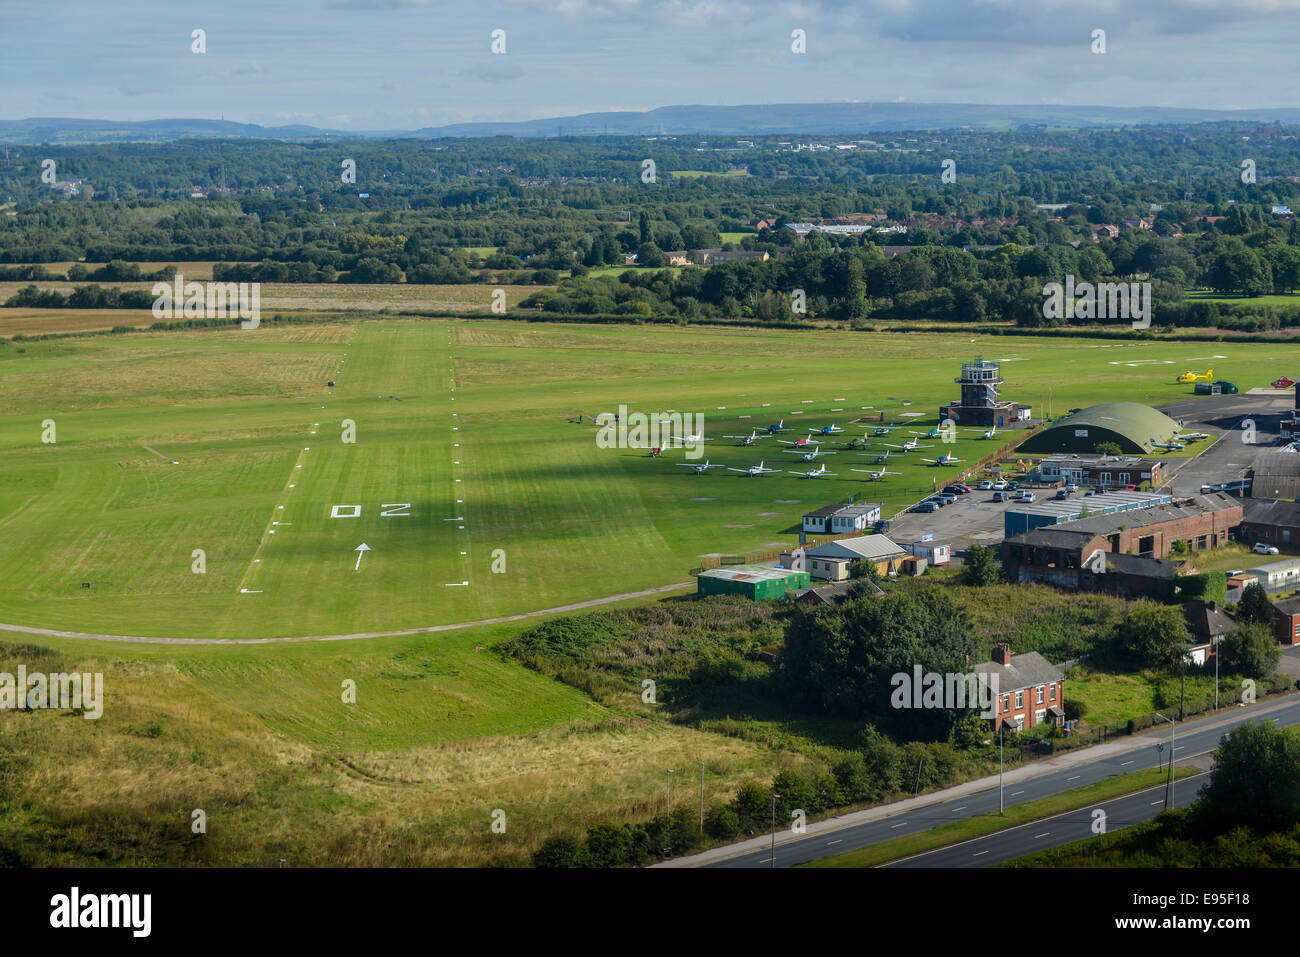 An aerial view of City Airport and Heliport in Manchester, United Kingdom Stock Photo